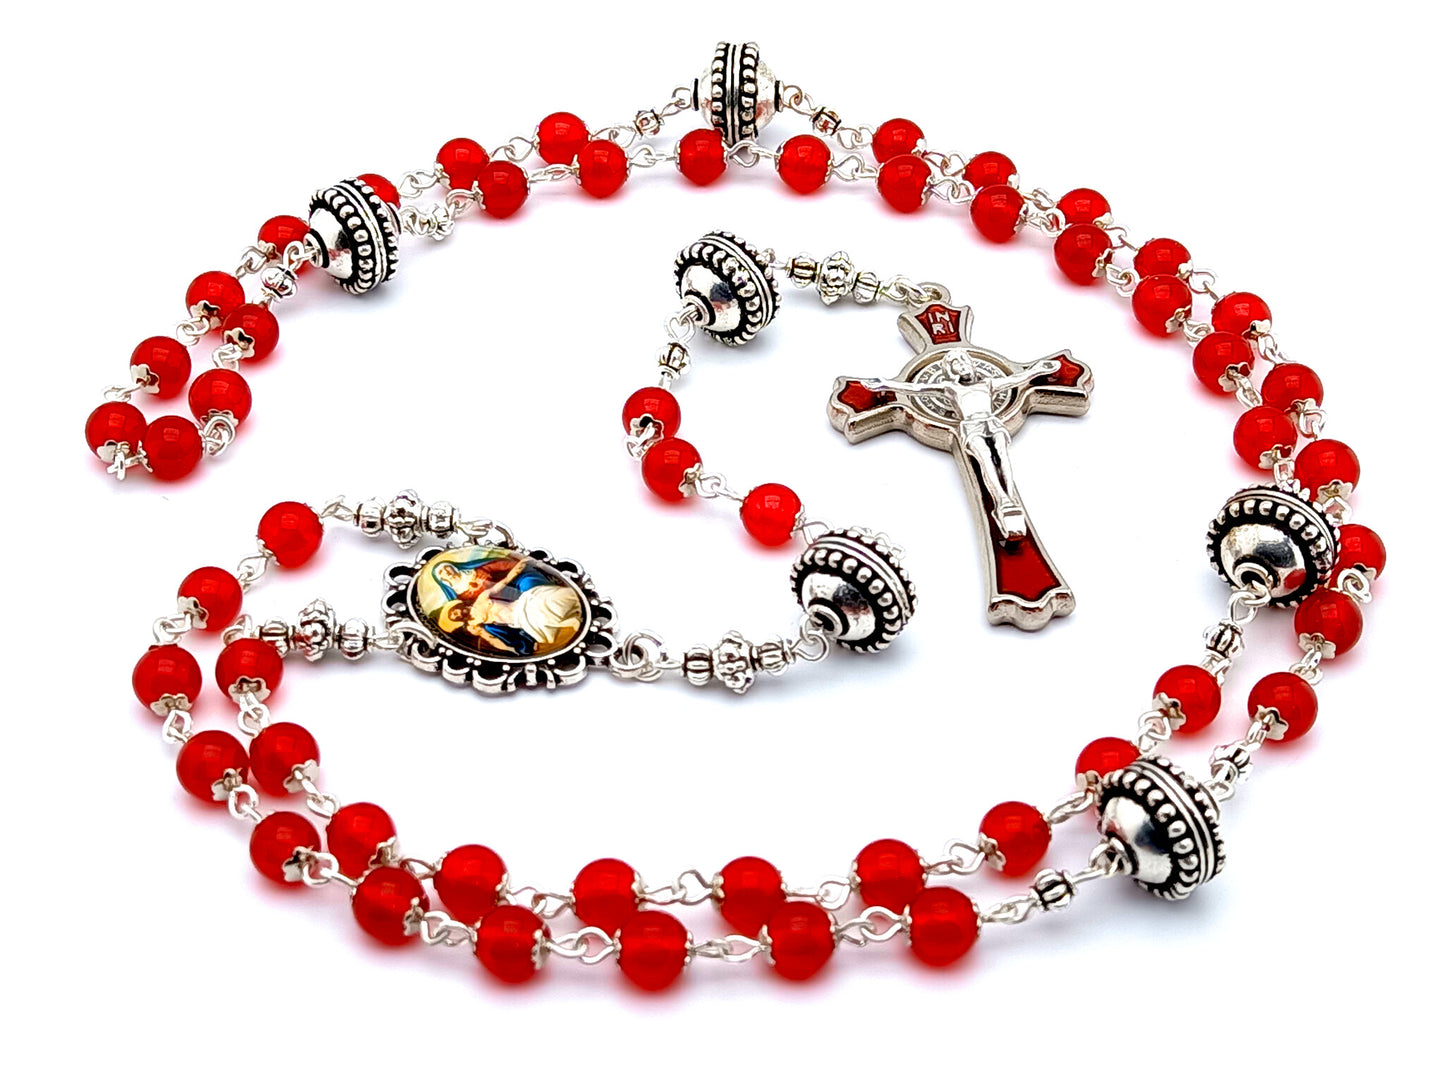 The Passion of Christ unique rosary beads with red glass and silver beads, red enamel and silver crucifix and picture centre medal.